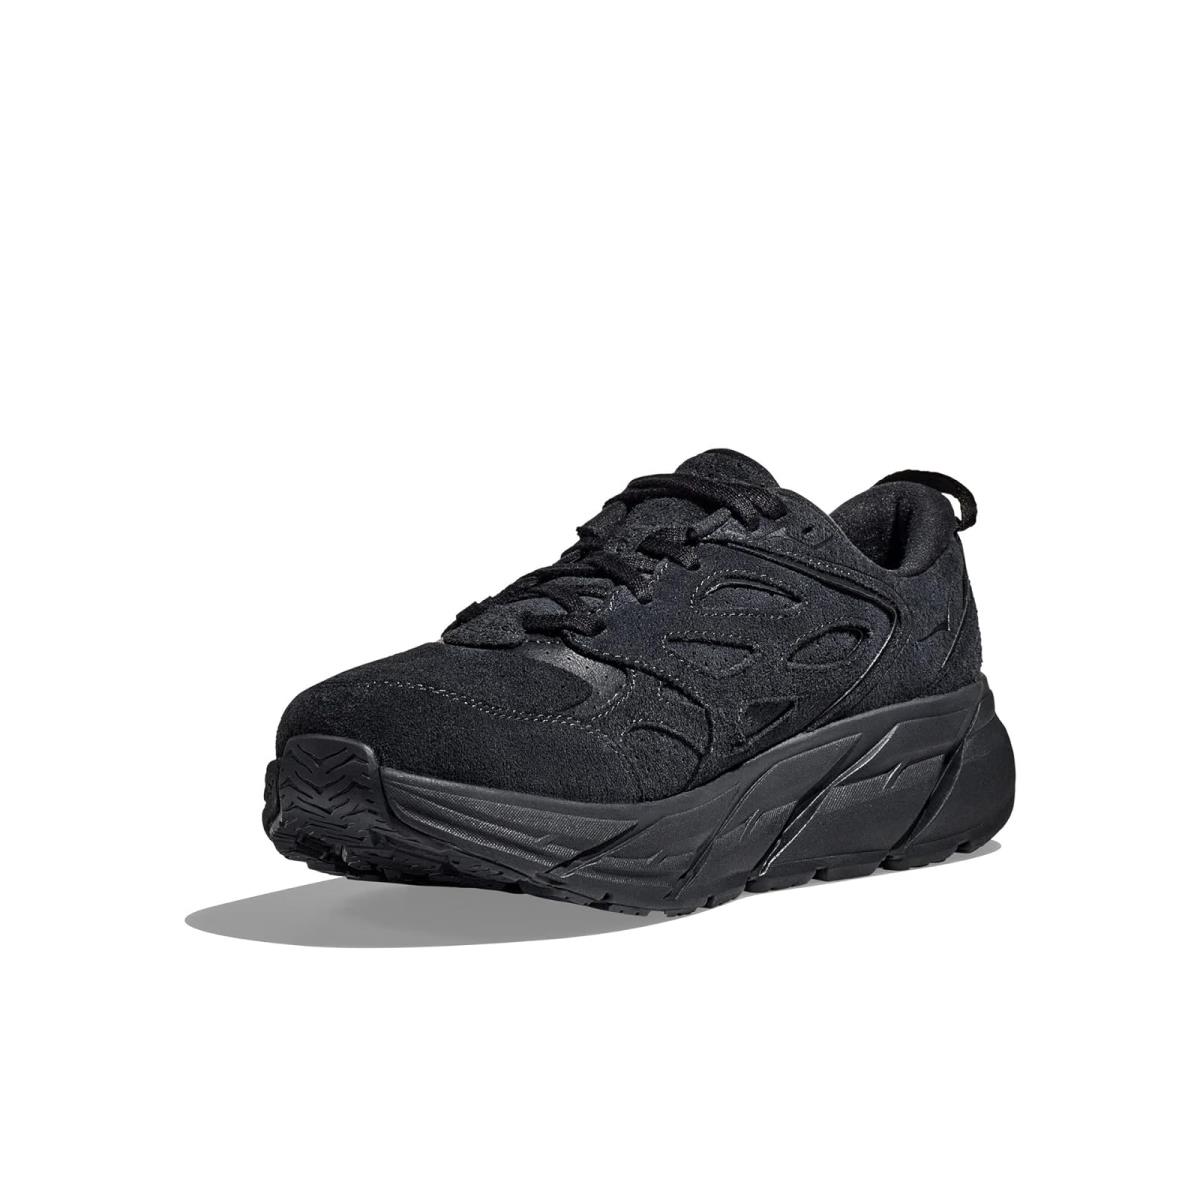 Unisex Sneakers Athletic Shoes Hoka Clifton L Suede Black/Black